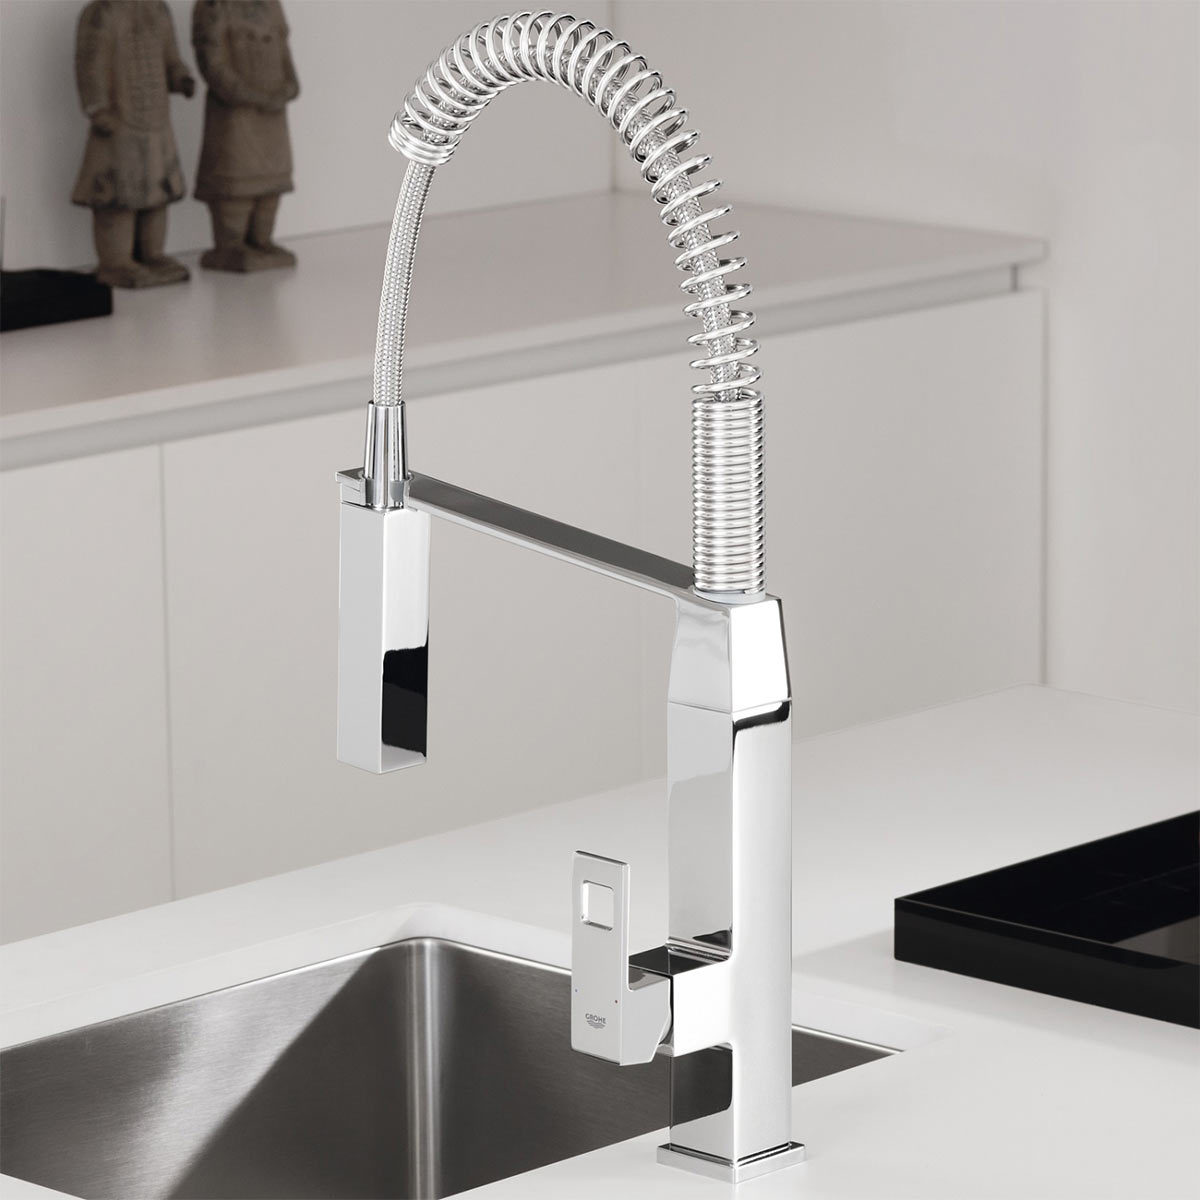 GROHE Eurocube Single-Lever Spring Mixer Tap in Chrome - Model 31395000